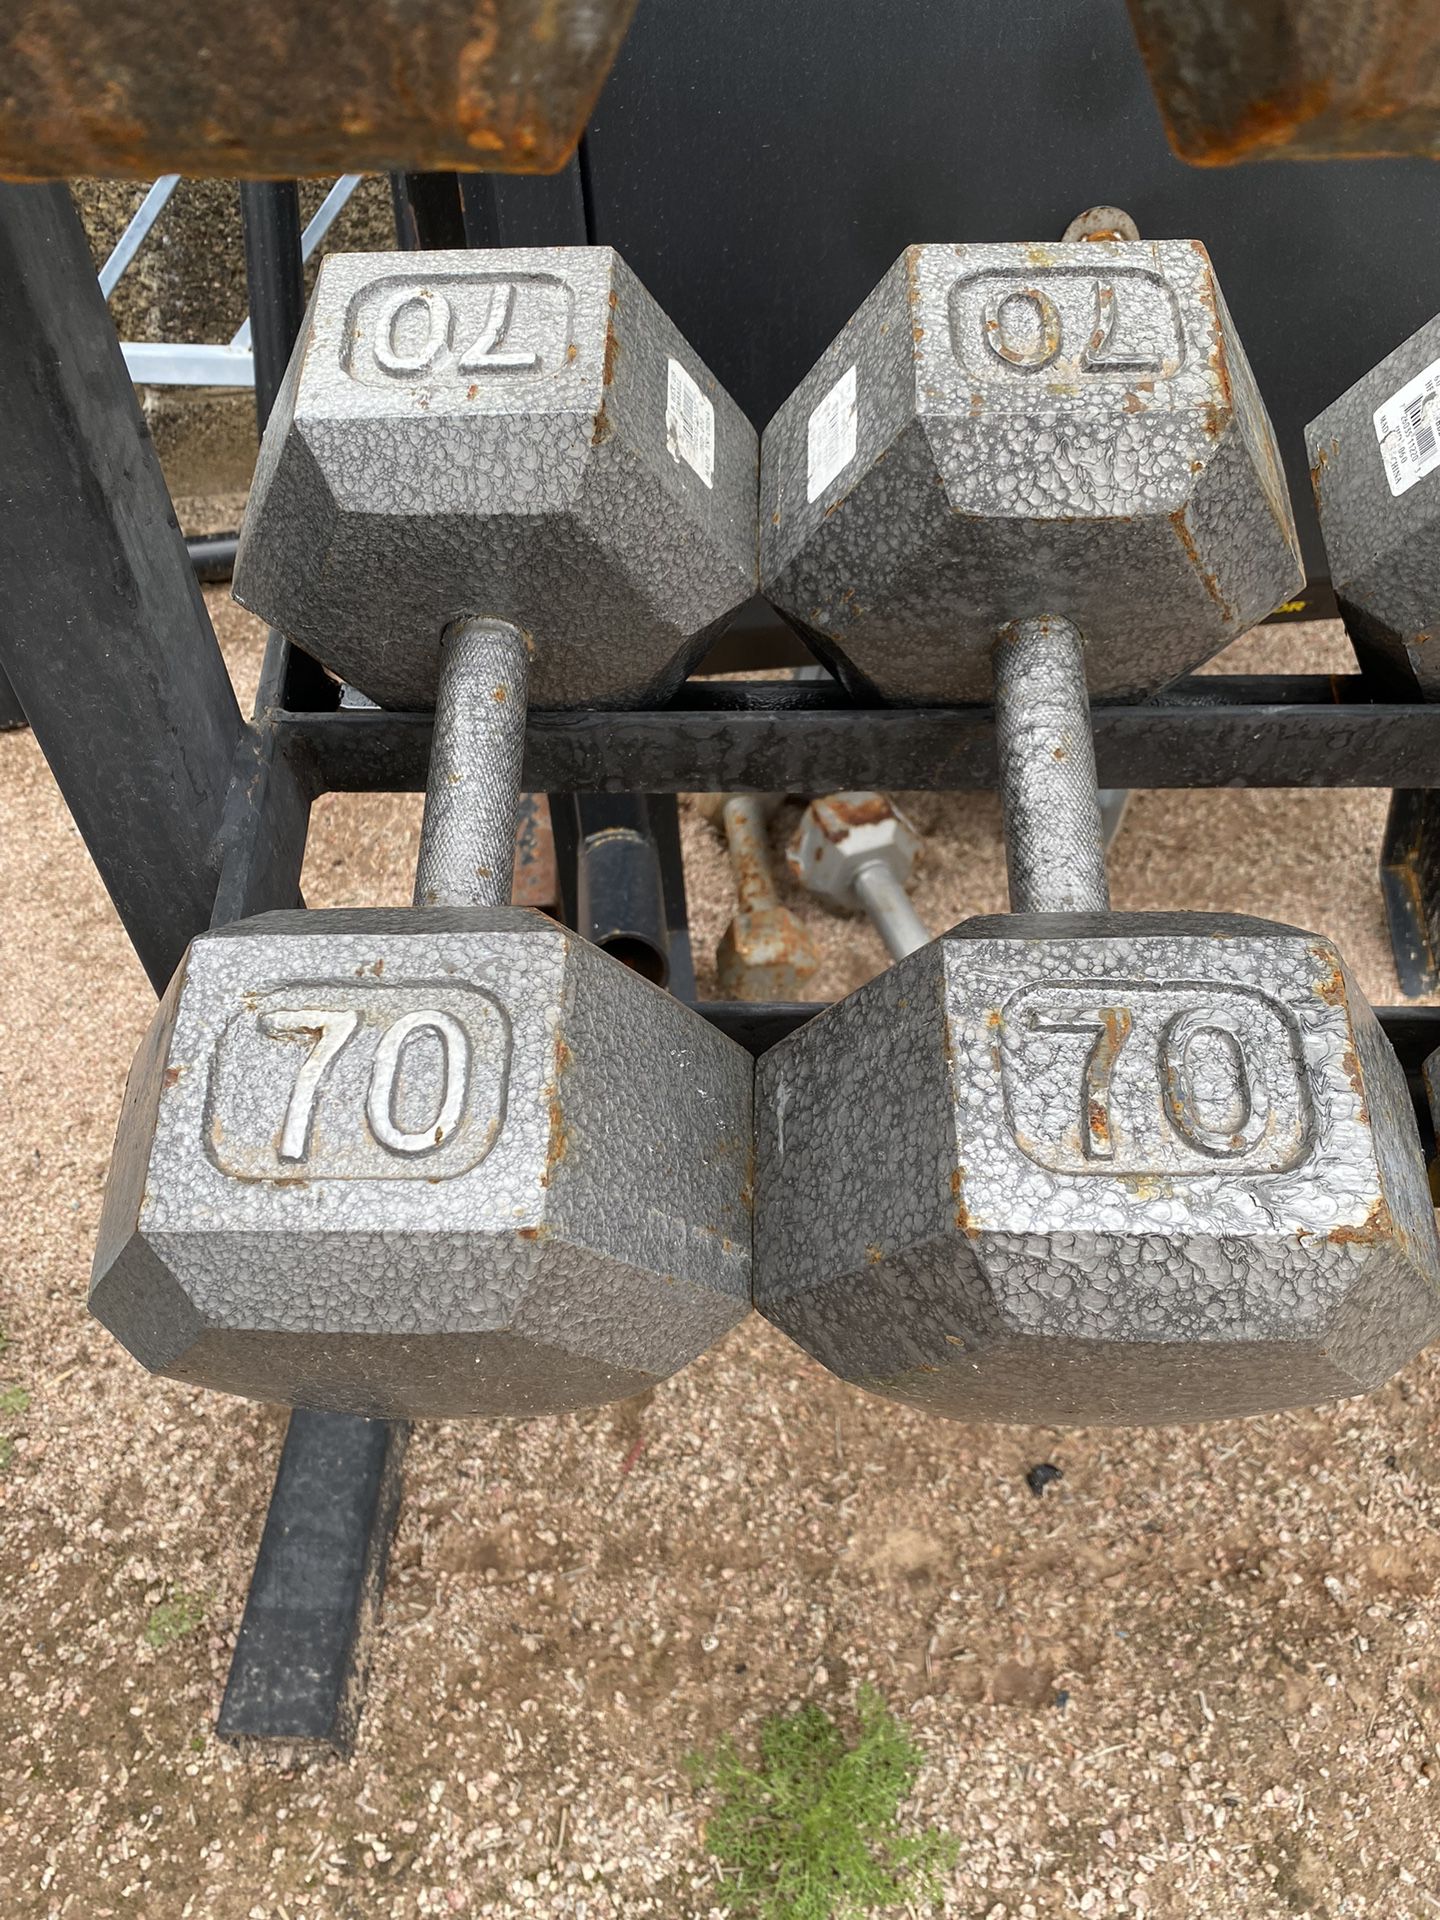 70lb Hex Iron Dumbbell Set Weights 